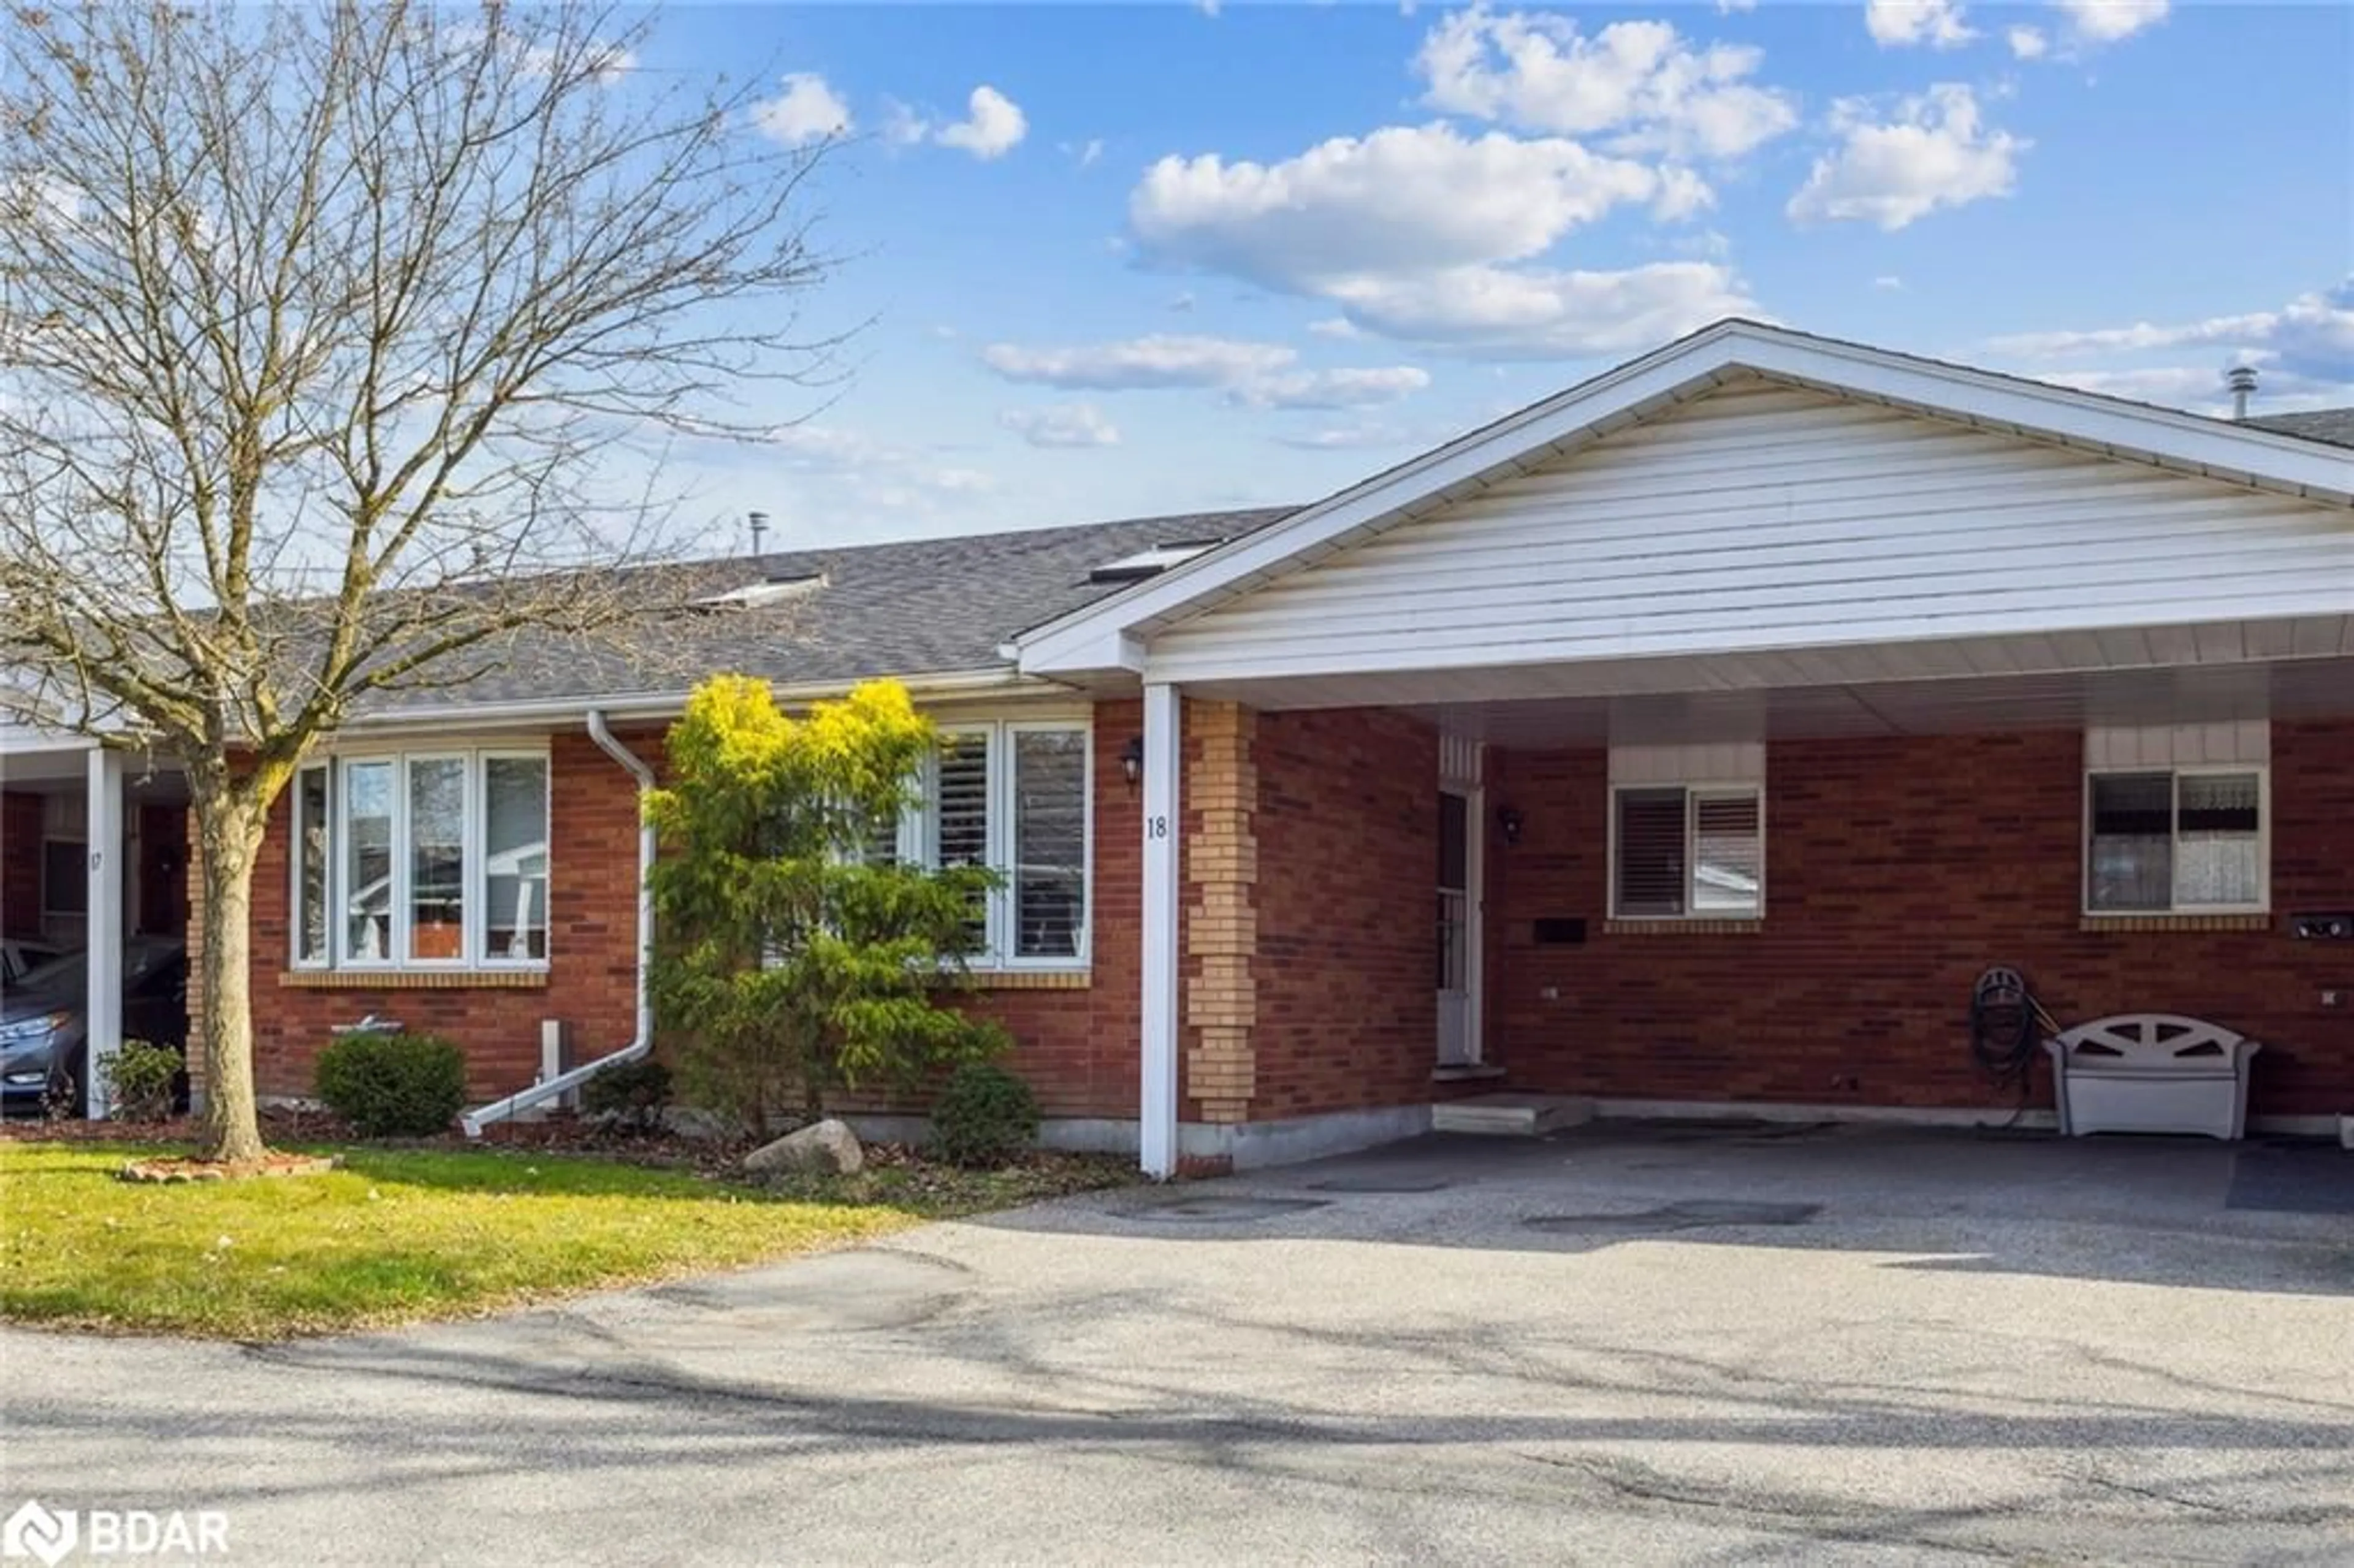 Home with brick exterior material for 1030 Colborne St #18, Brantford Ontario N3S 3T6